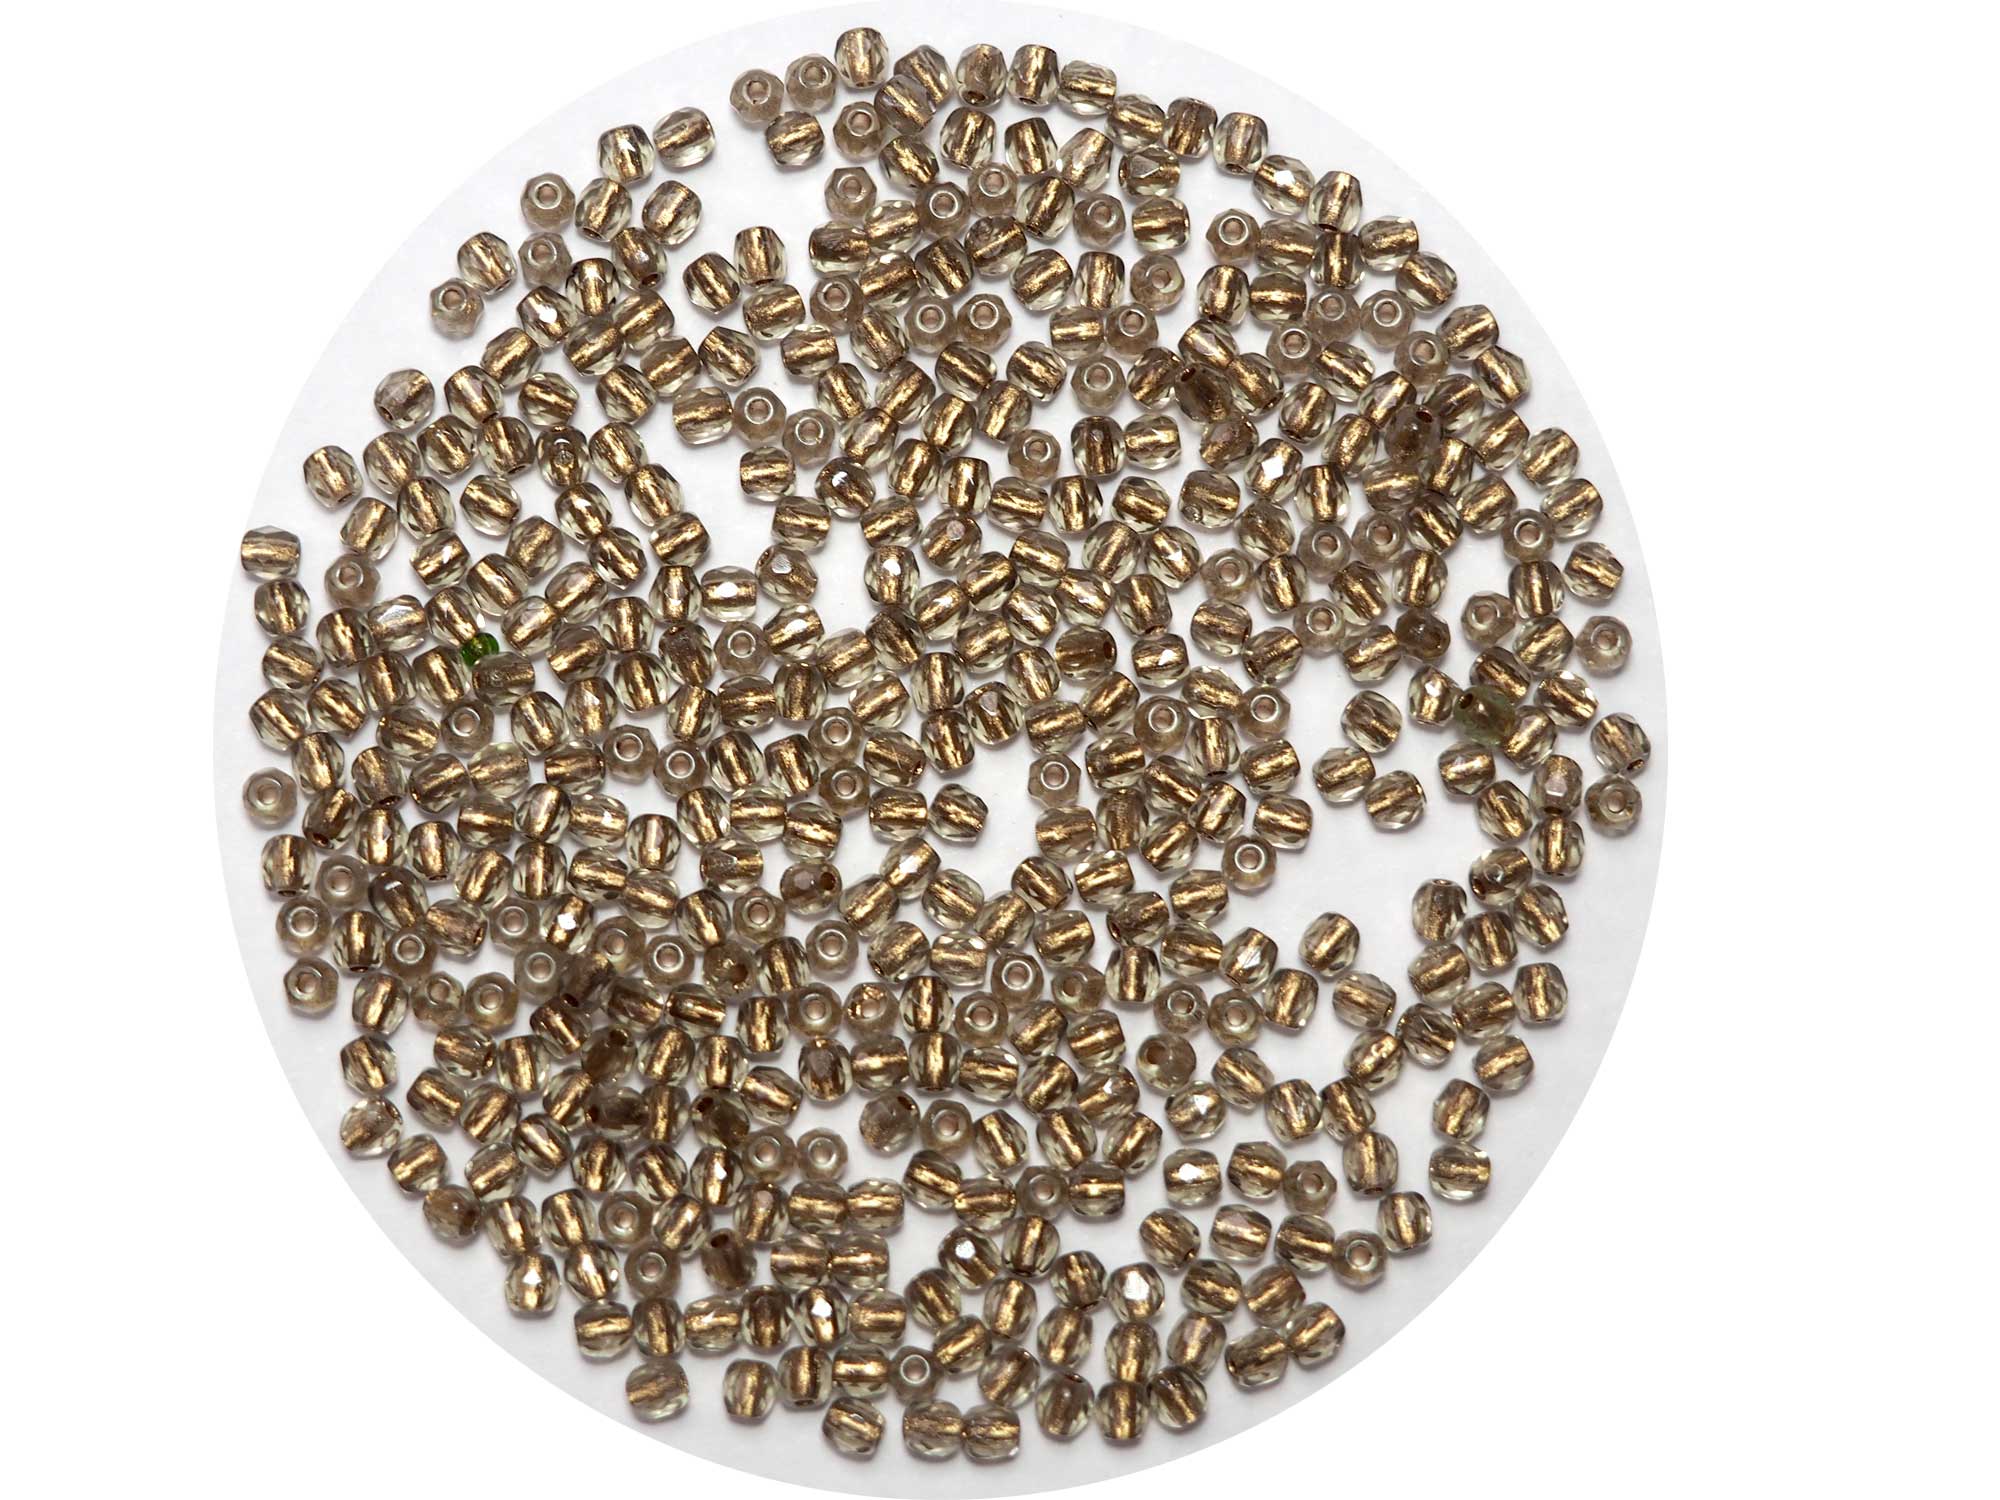 Golden Lined, Czech Fire Polished Round Faceted Glass Beads, 3mm 100pcs, P453